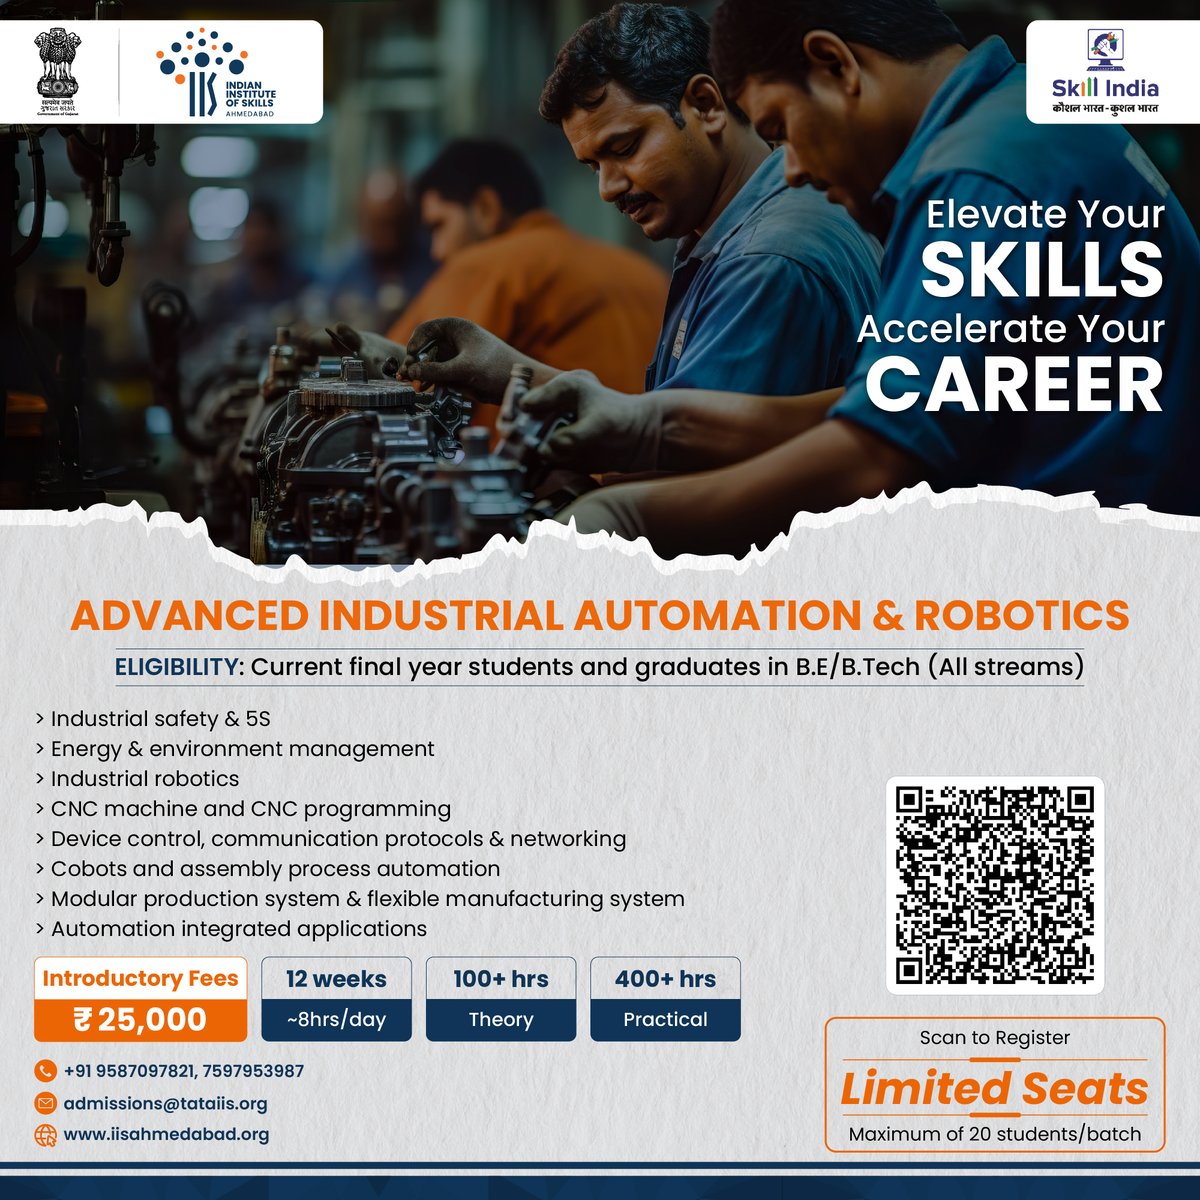 Today, advanced automation and robotics are changing manufacturing methods. Factories utilize high-tech tools such as AI and robots to enhance production speed and accuracy. This leads to more affordable products with improved quality. This significant shift supports business…